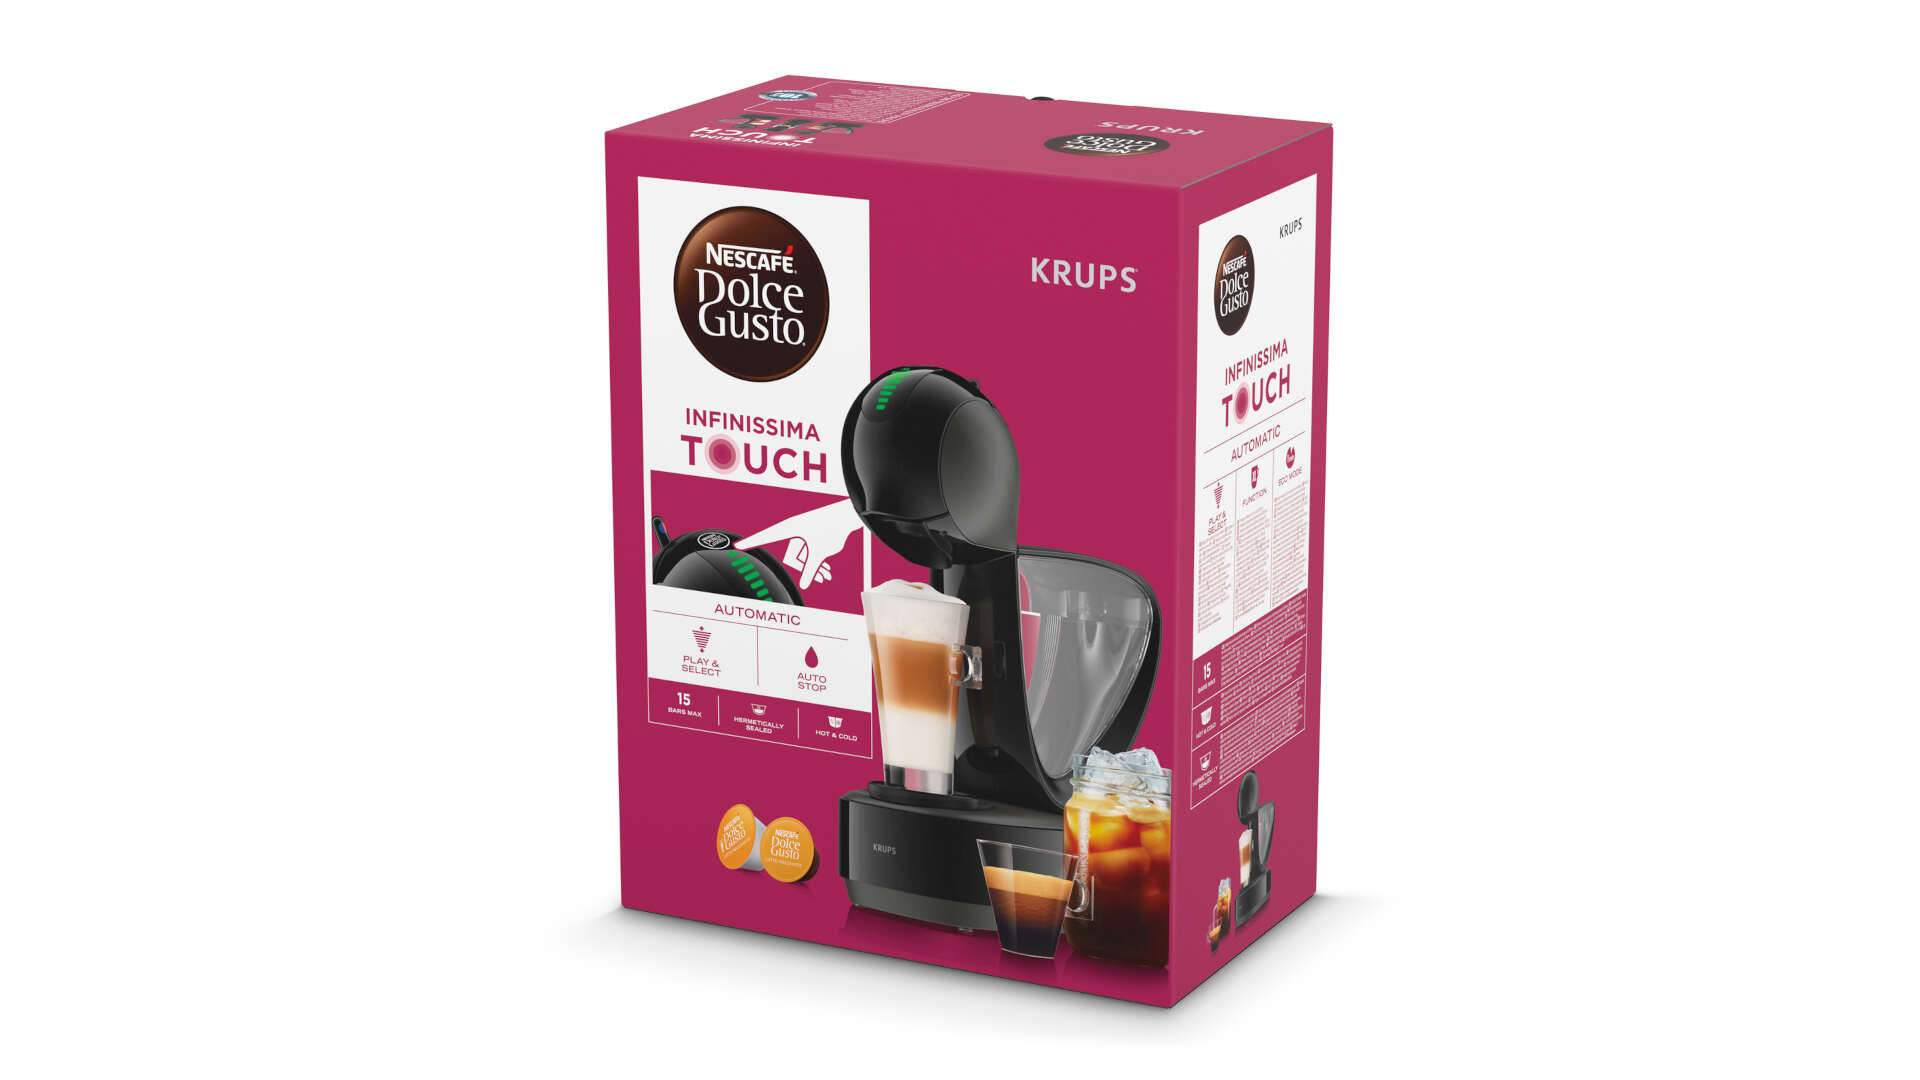 KRUPS KP2708 INFINISSIMA TOUCH